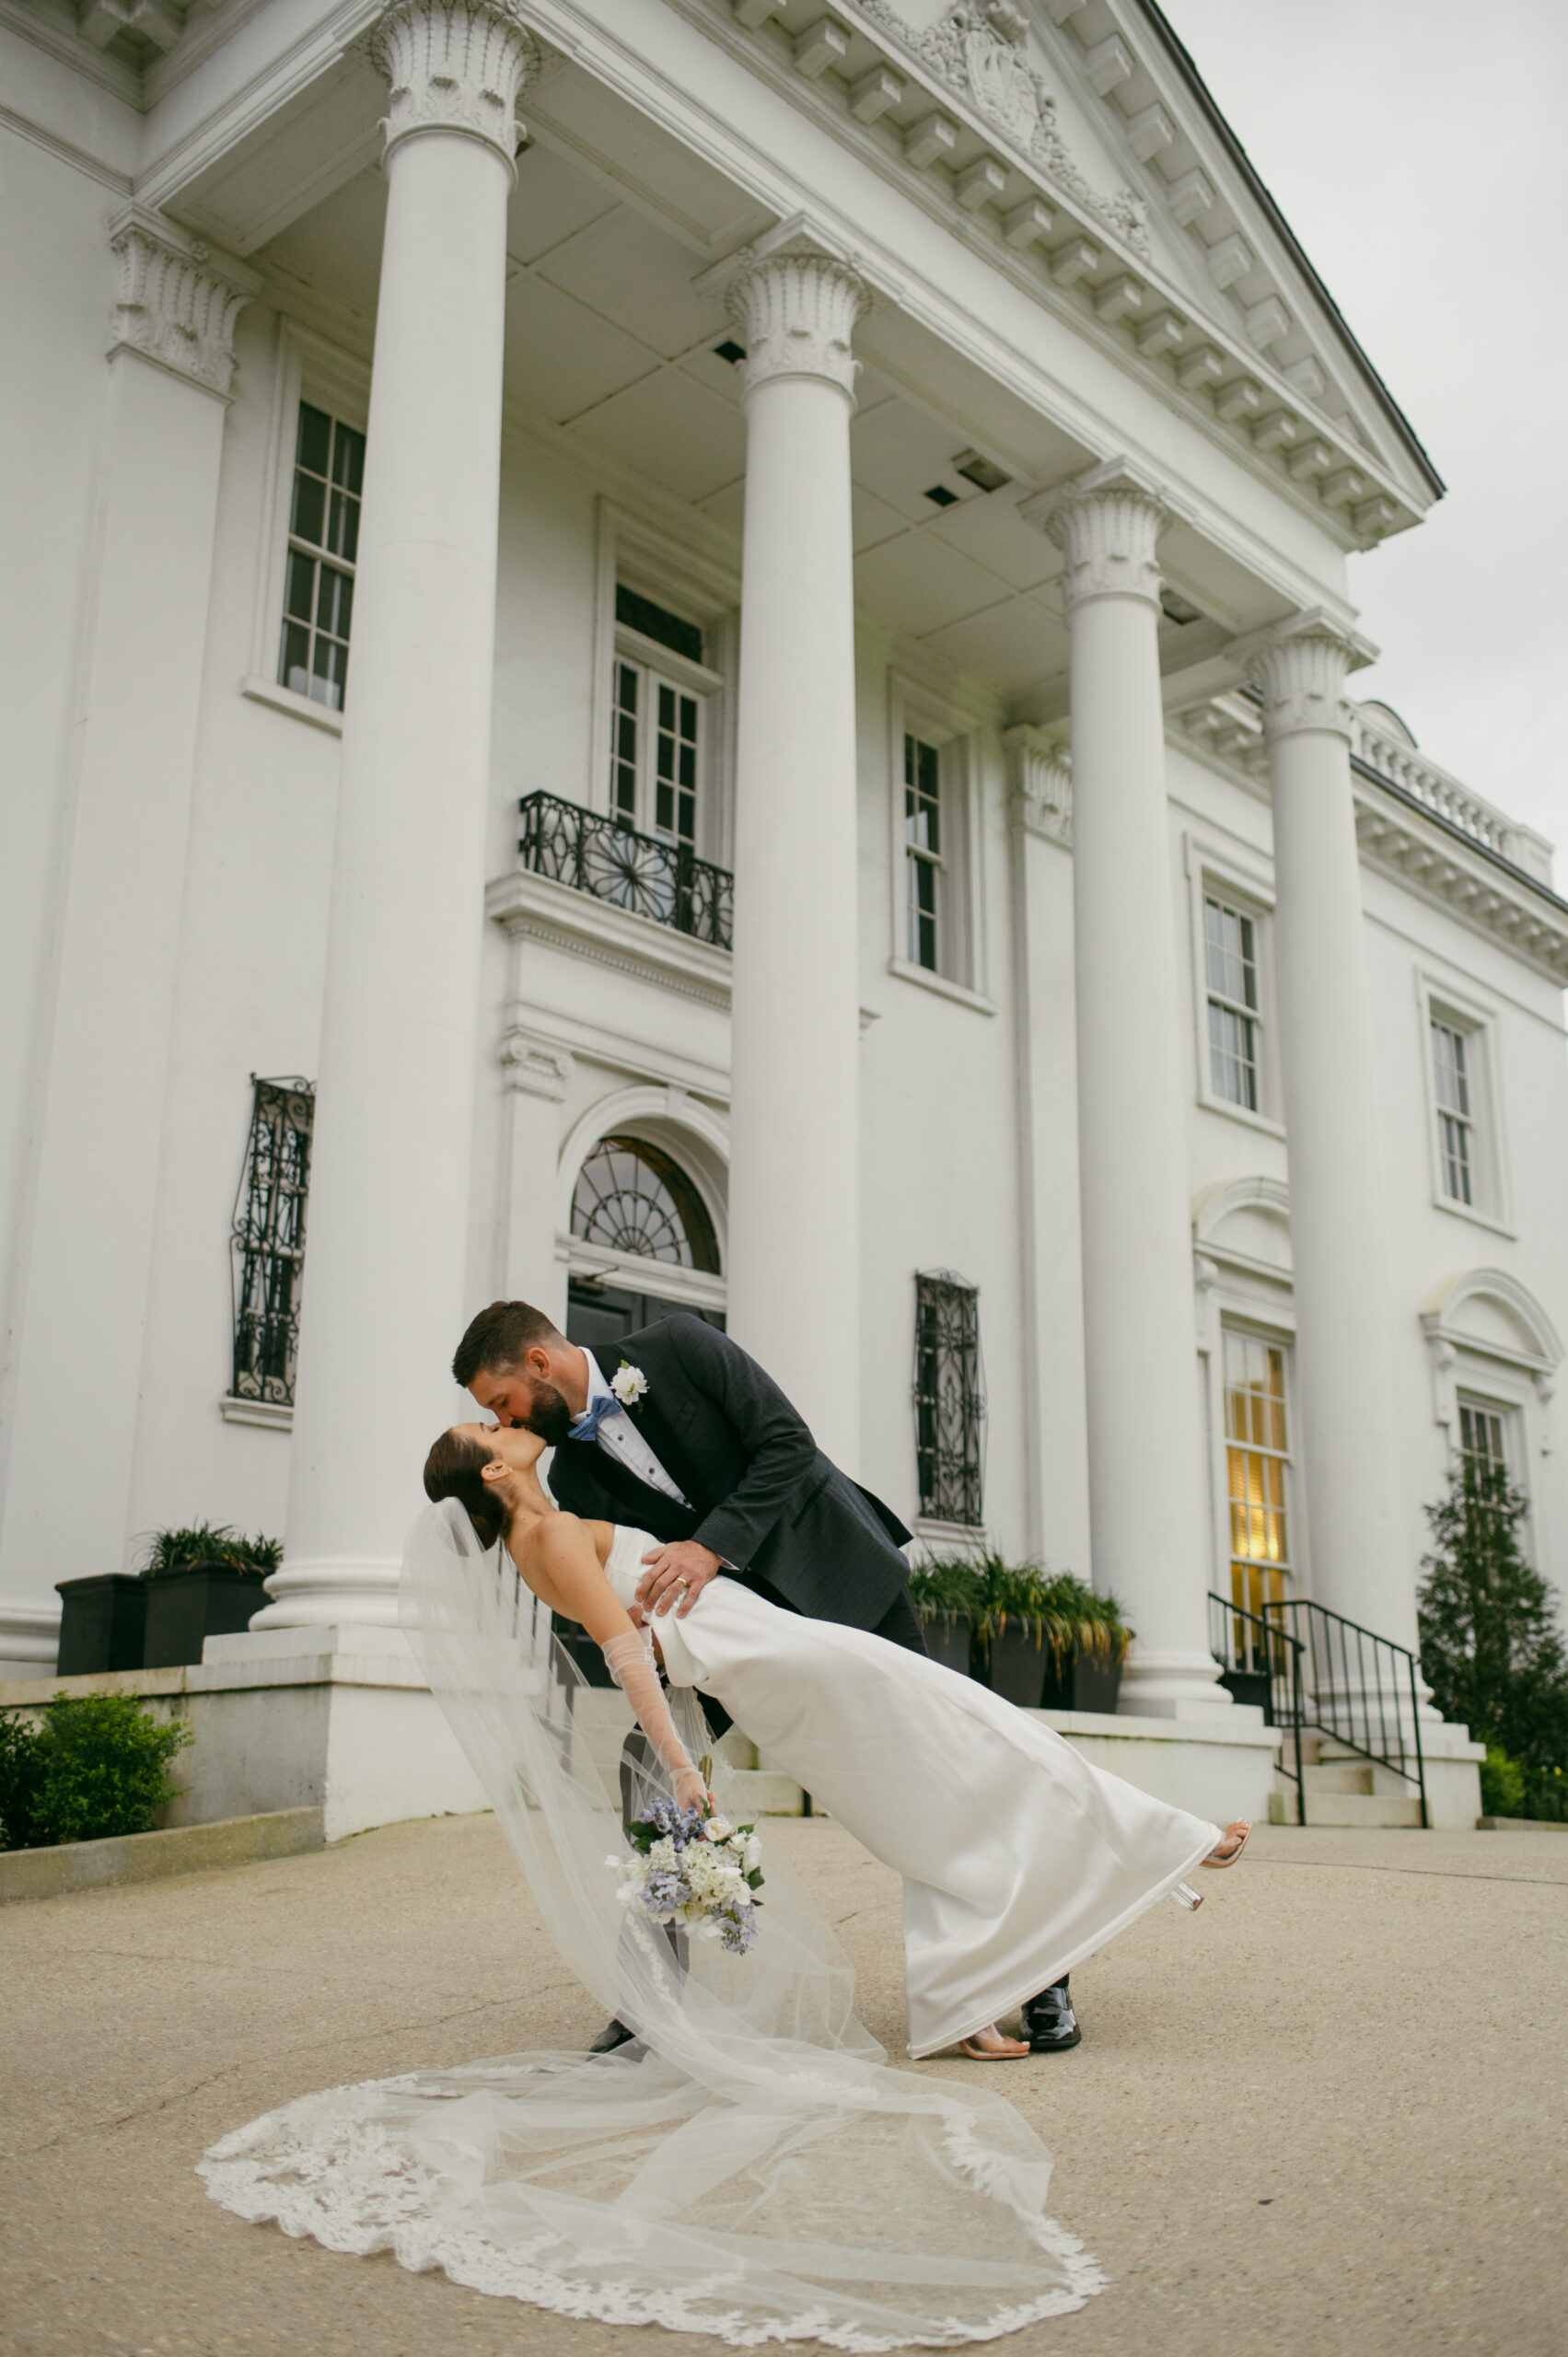 A bride and groom dip-kissing in front of the old governor's mansion in louisiana.